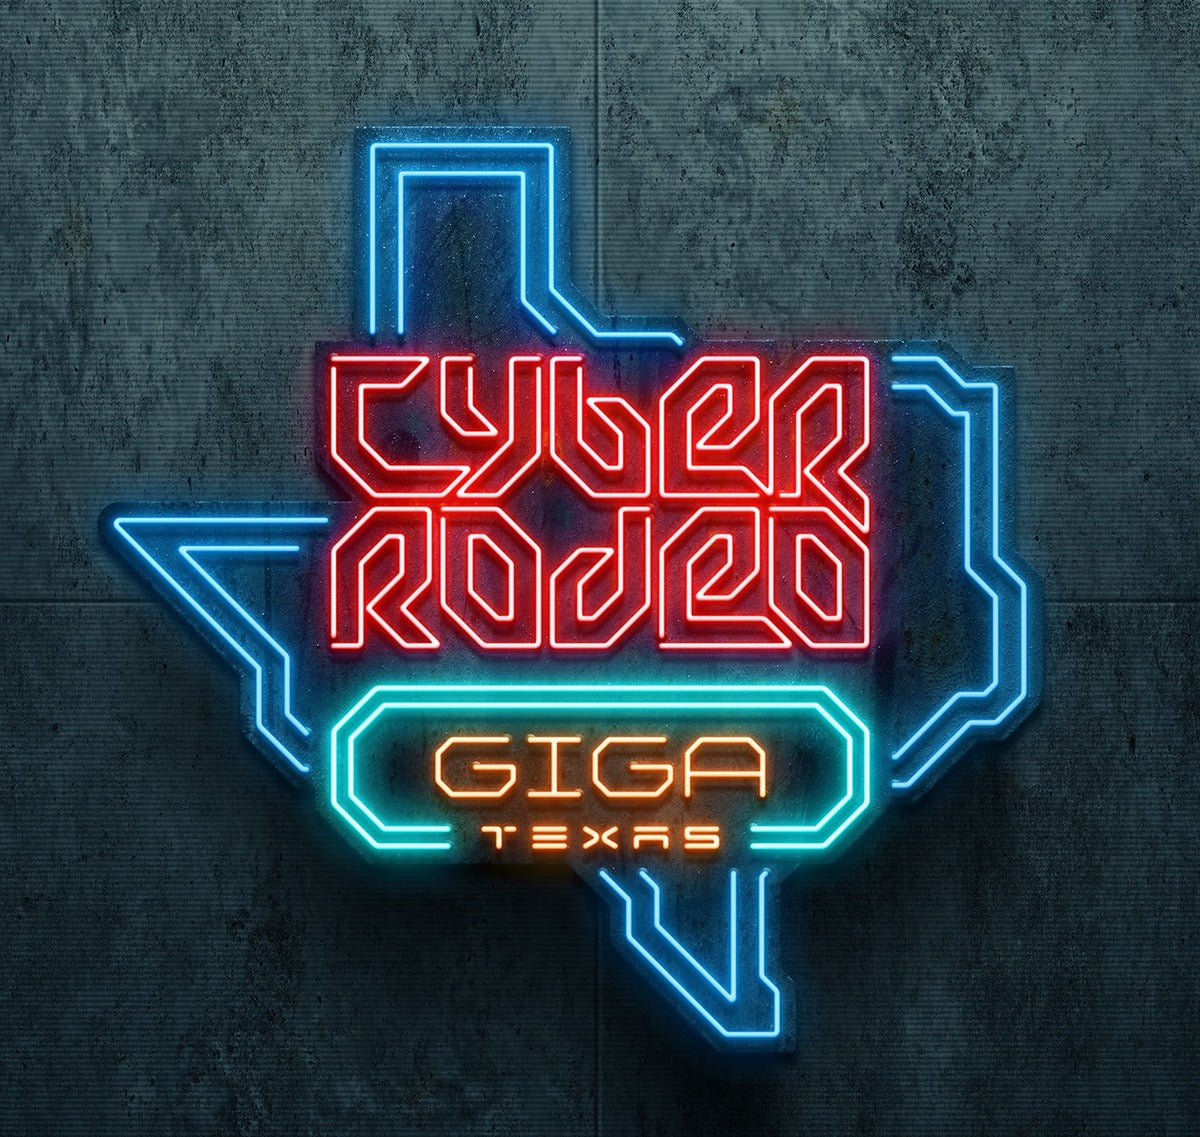 Tesla Sends Out Invitations for Cyber Rodeo Event at Giga Texas